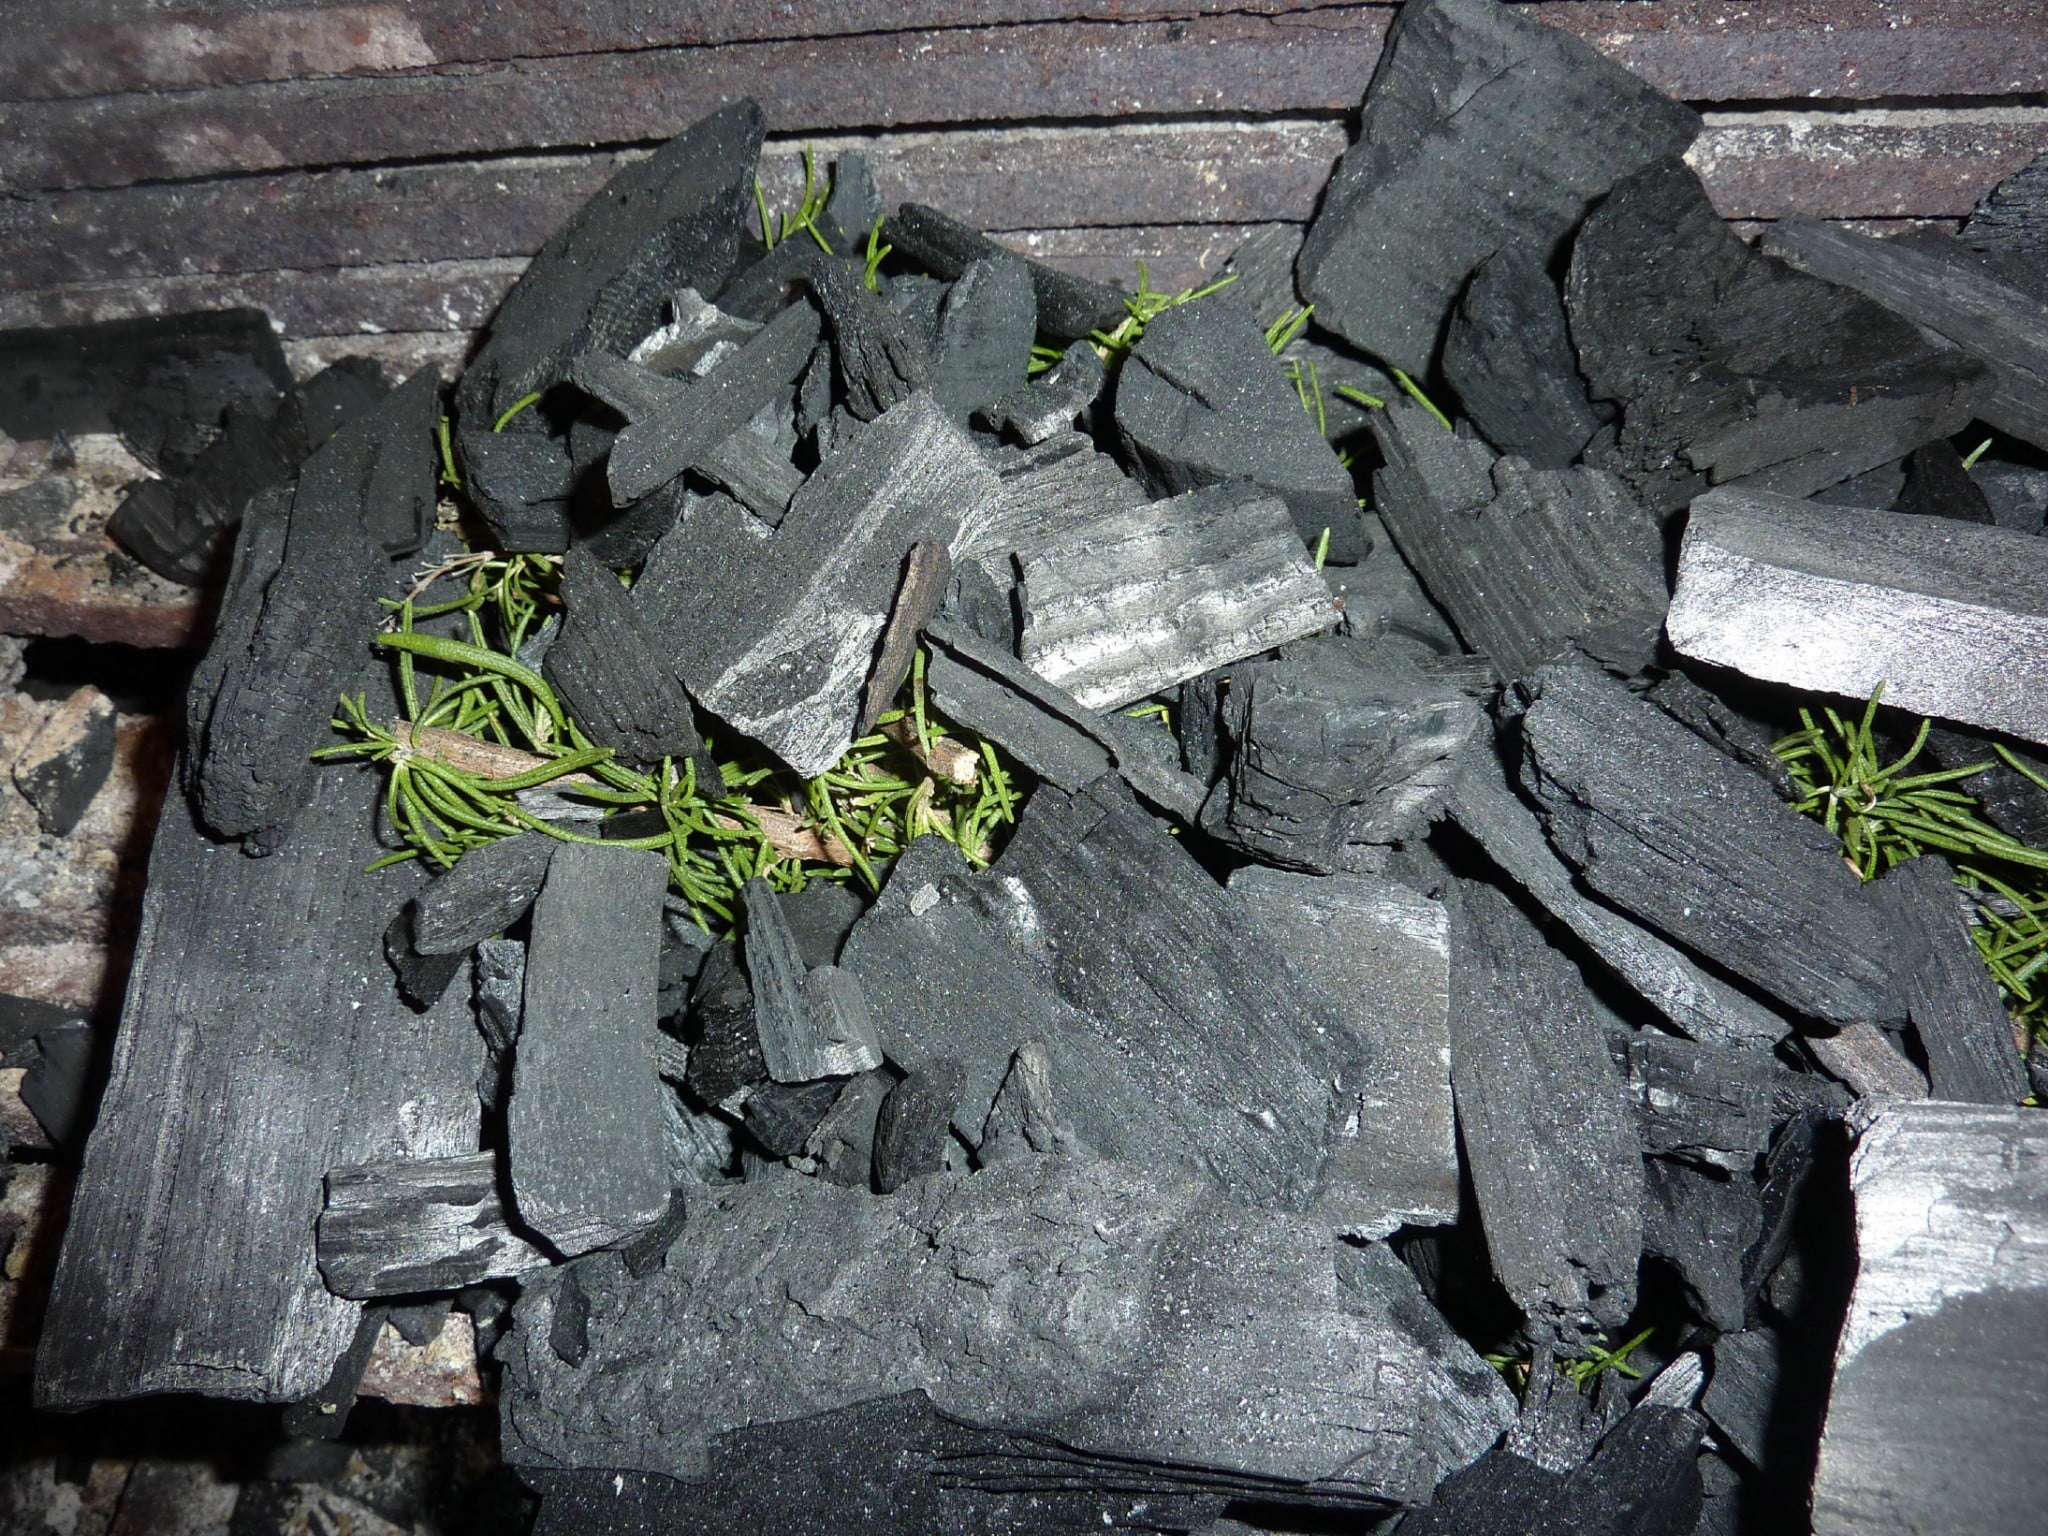 barbecue charcoal